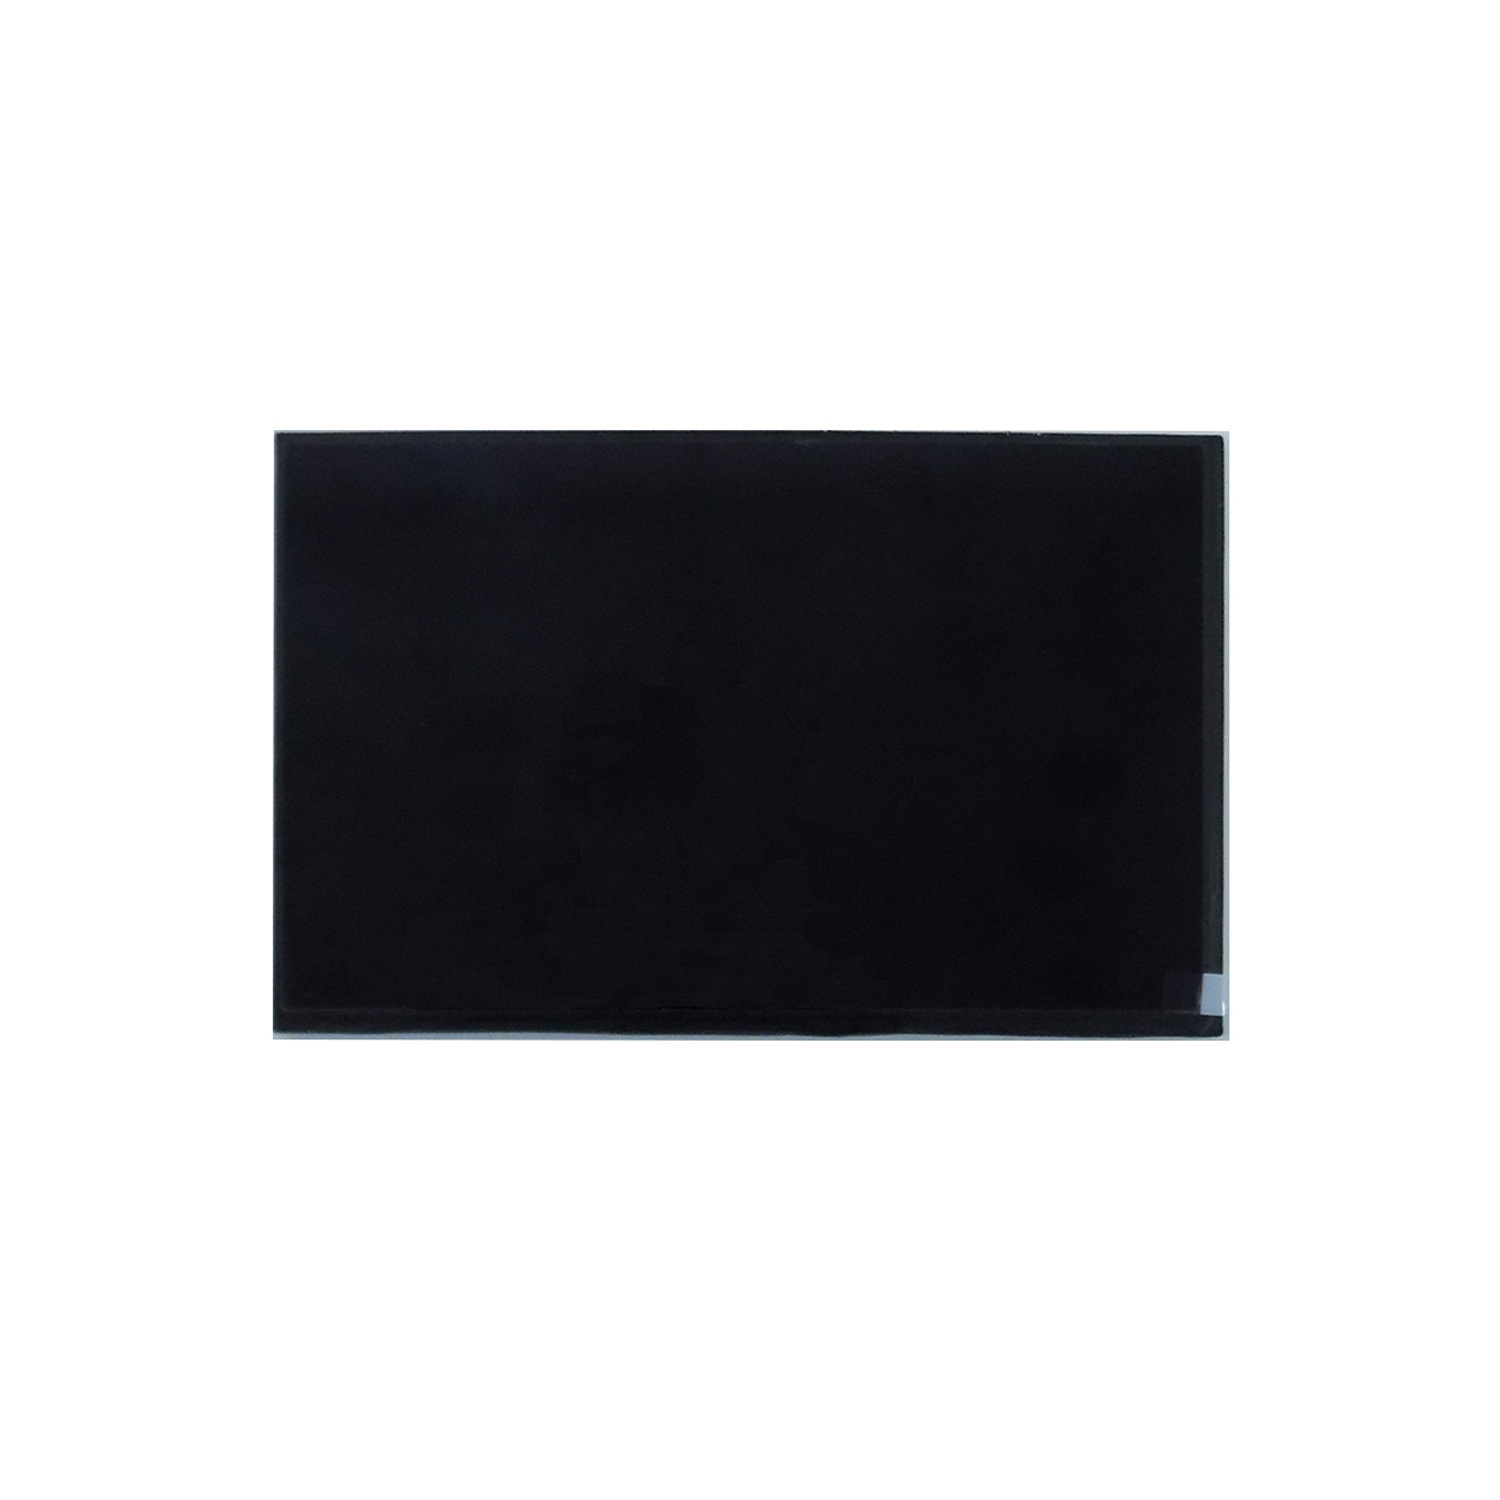 Replacement LCD Display Screen Compatible With Acer Iconia One 10 B3-A50 - Black